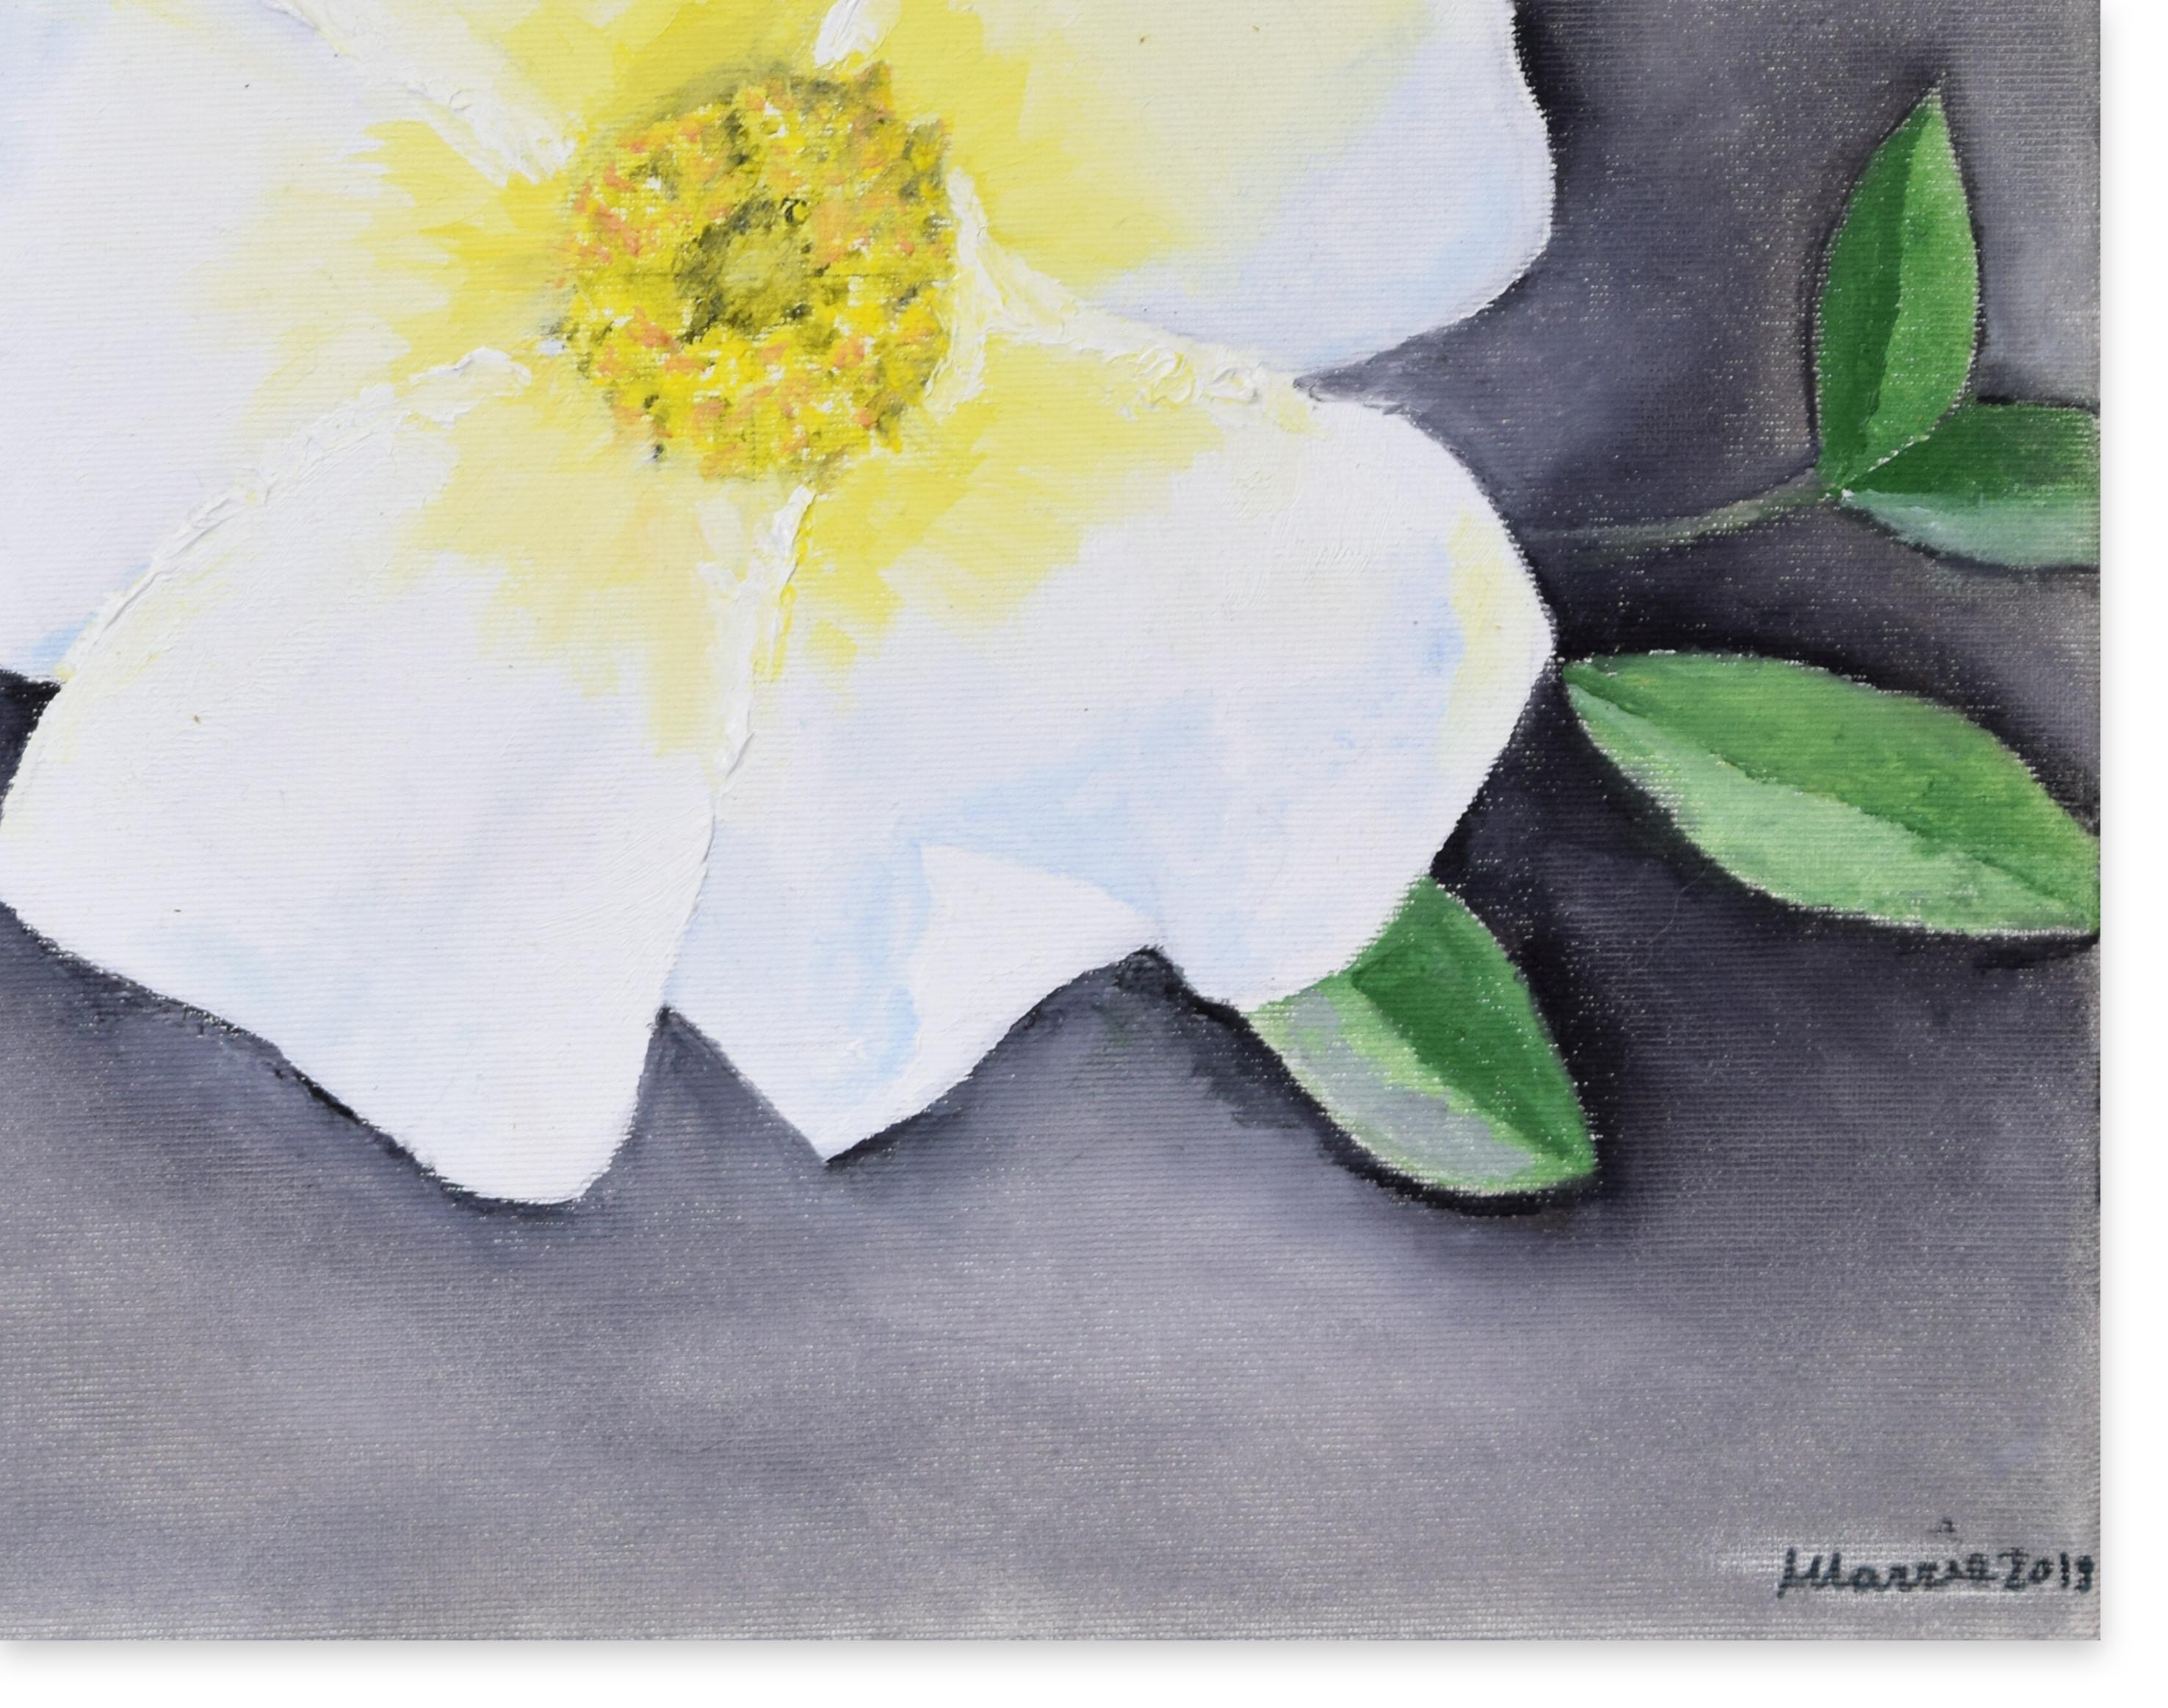 Rosa Bracteata is an original artwork realized by Marzia Trinca in 2019.

Original colored oil painting.

Hand-signed and dated by the artist on the lower-right corner.

This beautiful painting represents the beautiful flower of Rosa Bracteata, with